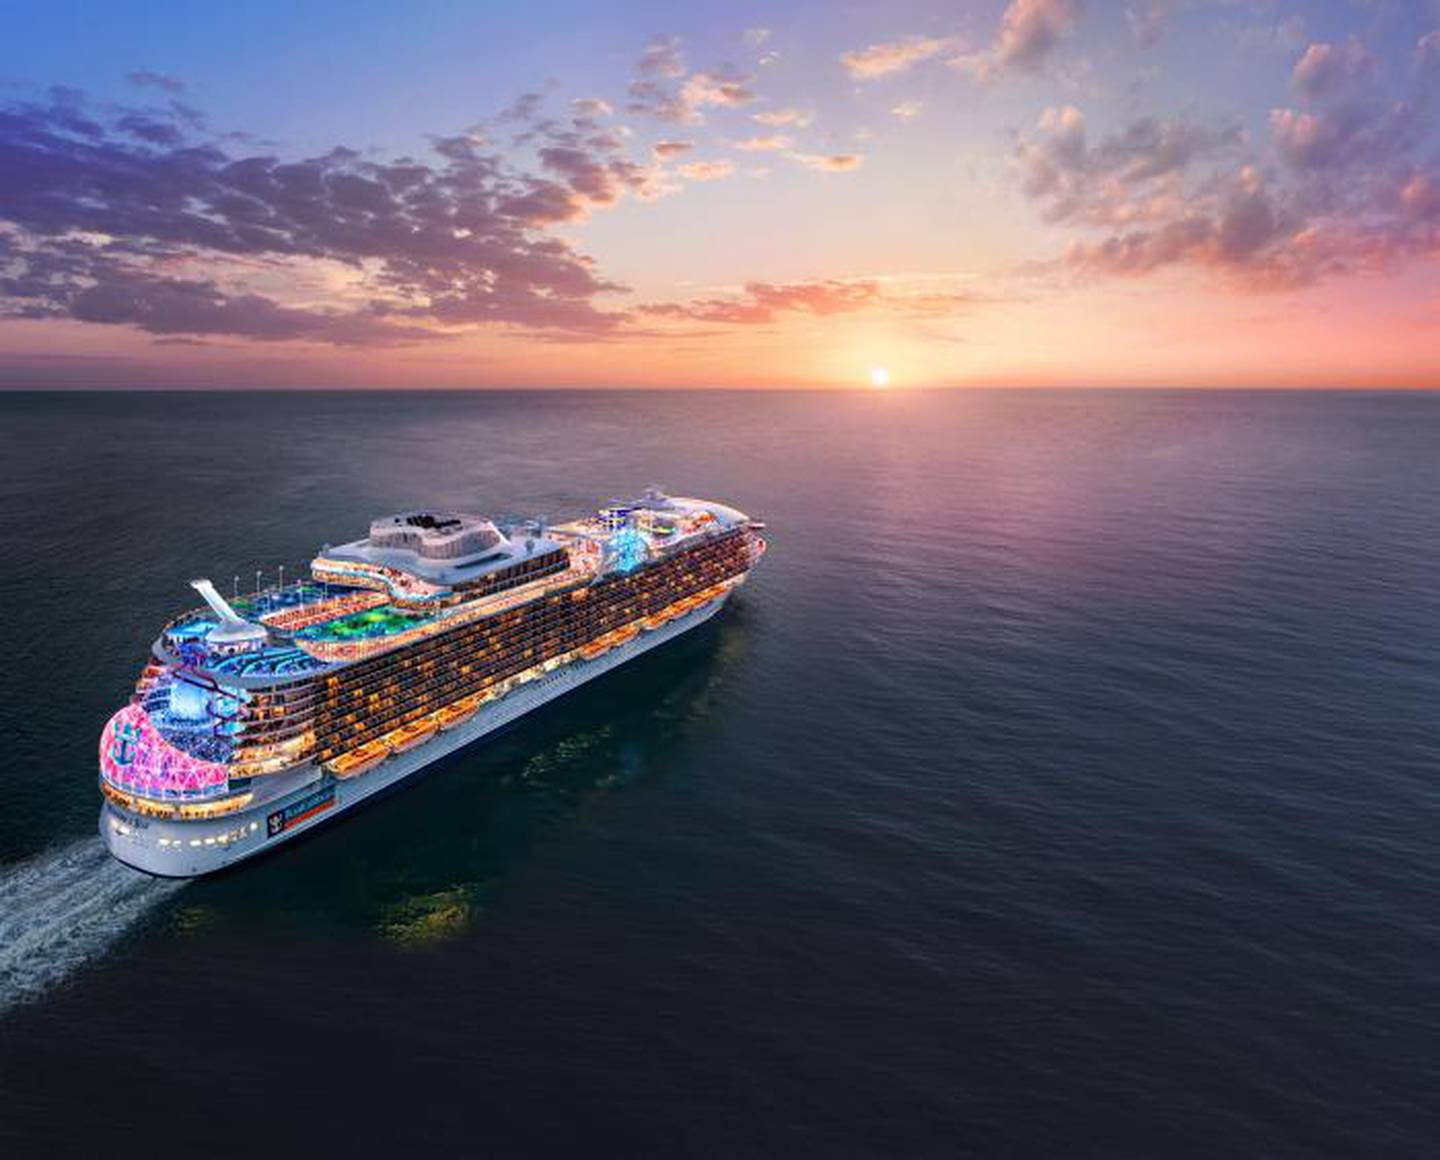 The 'Wonder of the Seas' is set to be the world's largest cruise ship when it is completed in 2022 and has plans to sail via Dubai. Courtesy Royal Caribbean